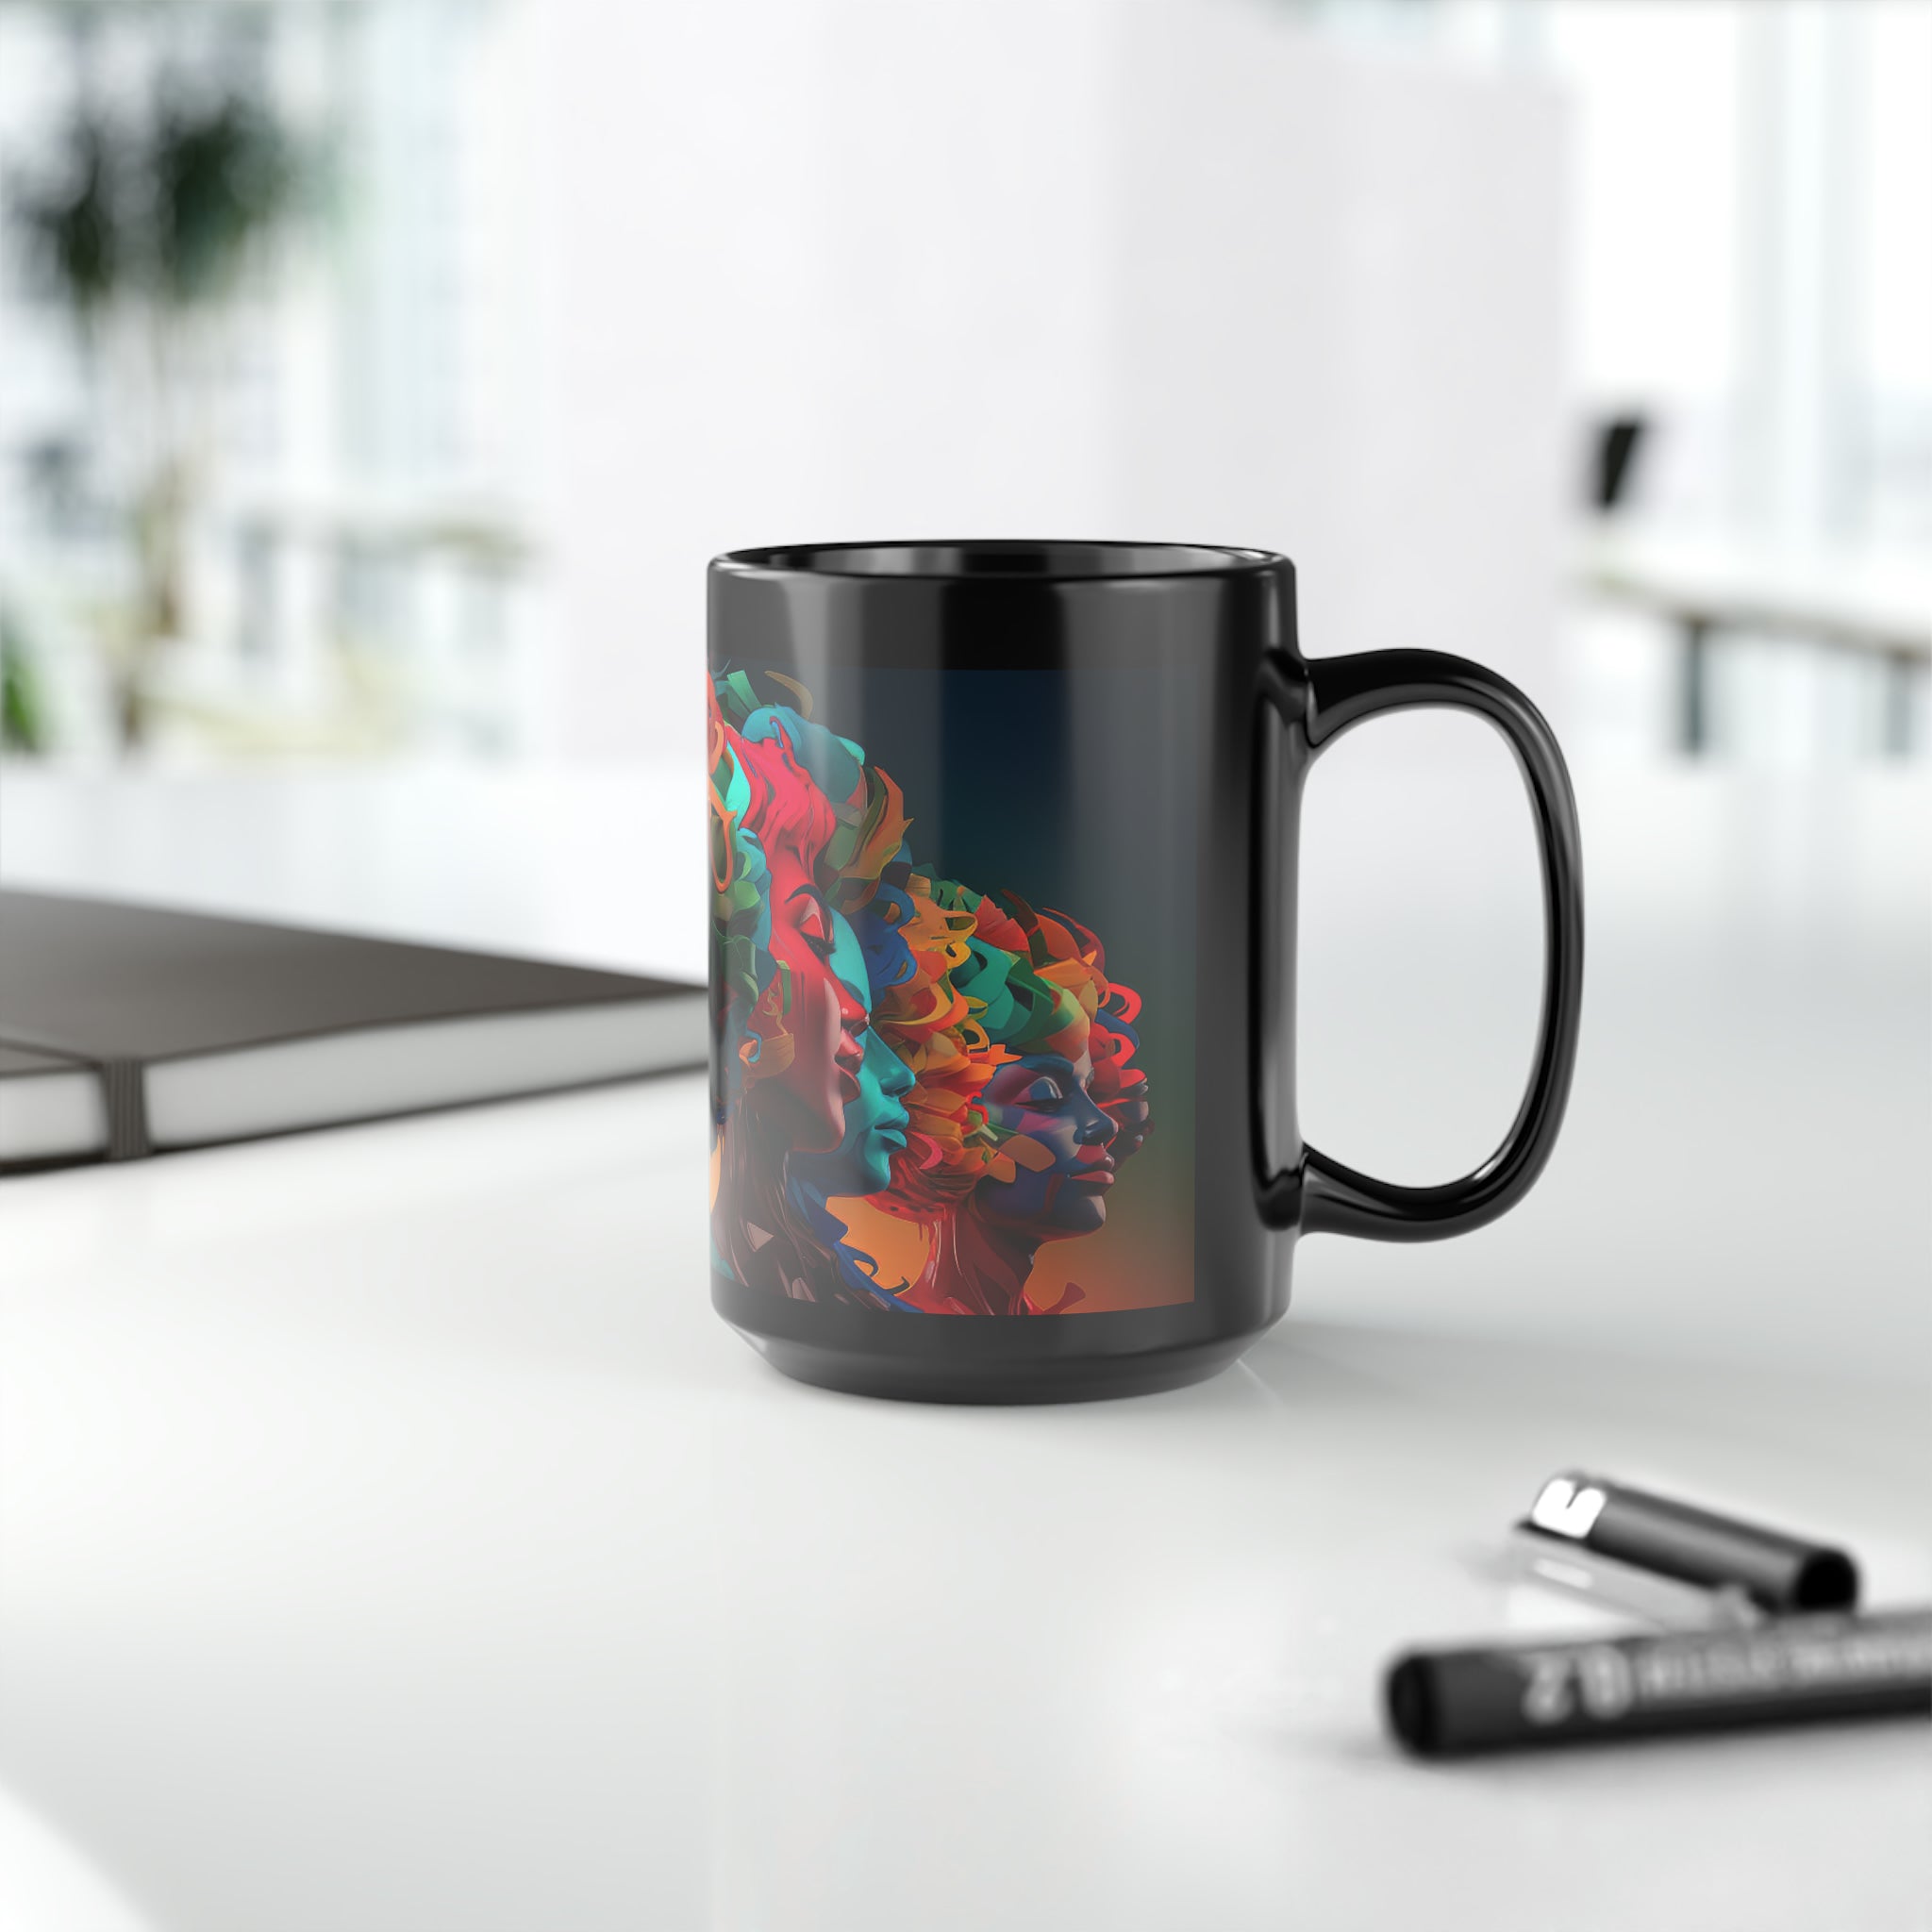 "COLORED FACES" African American Themed 15oz Coffee Mug